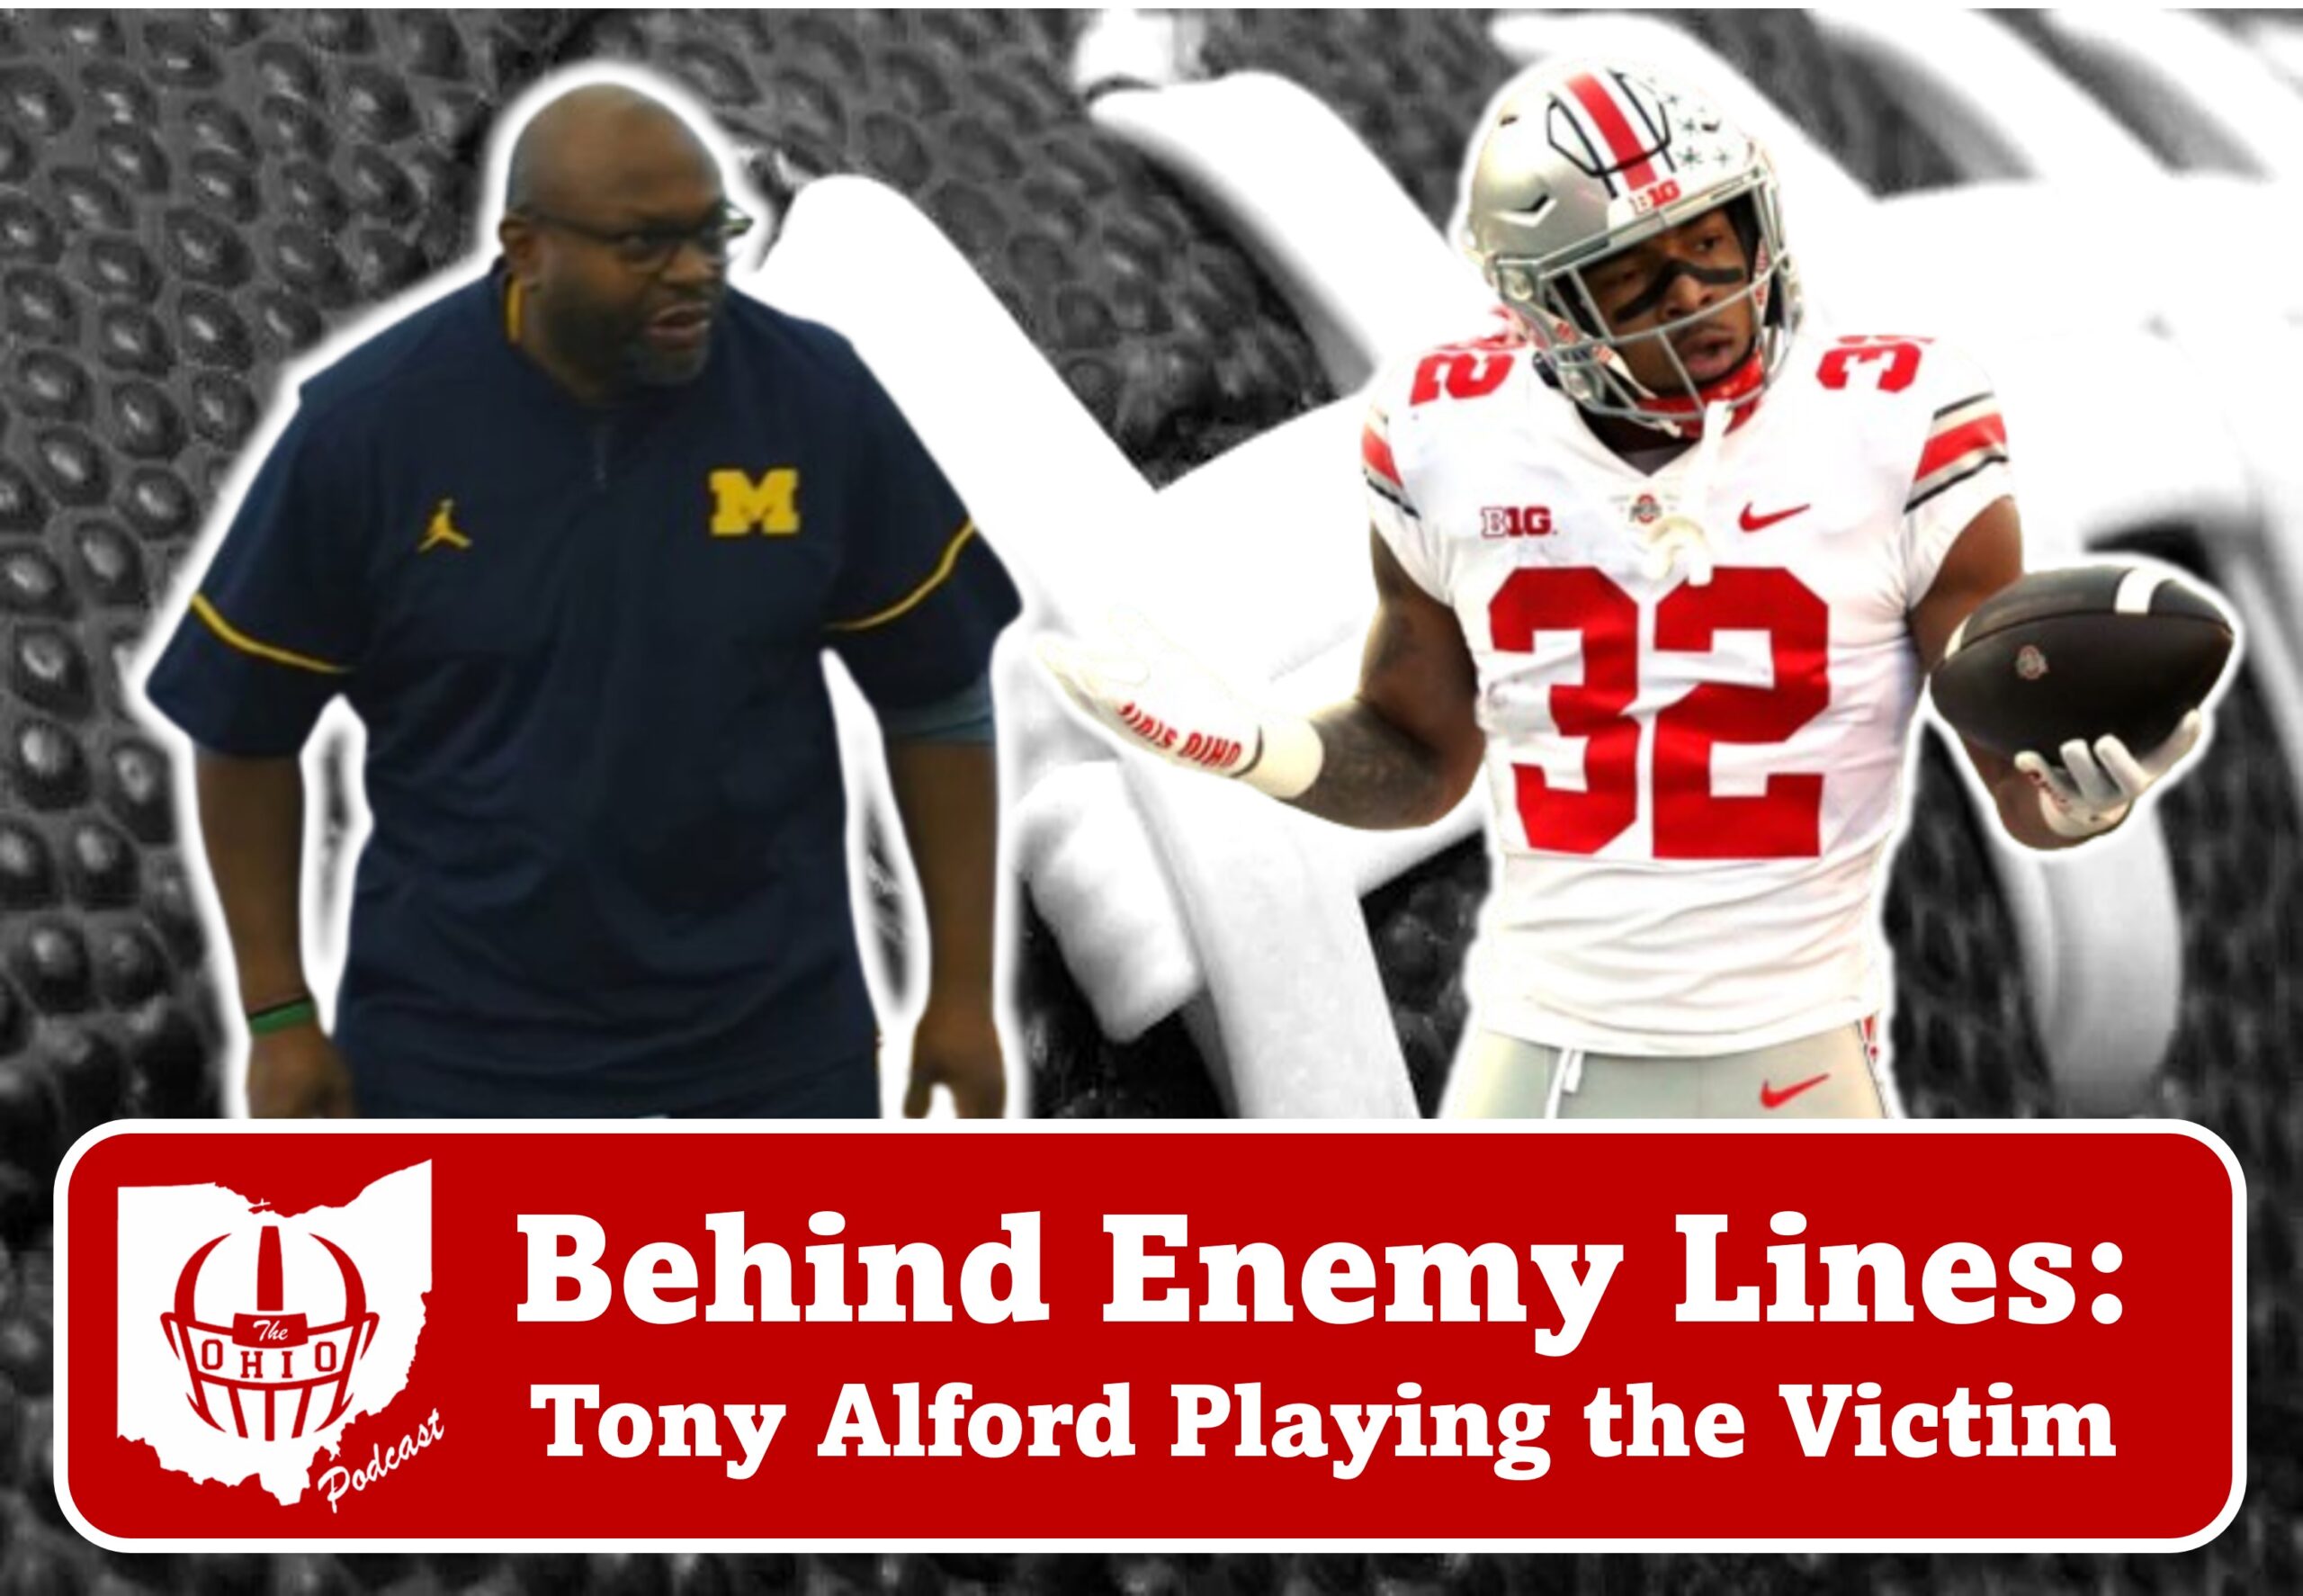 Tony Alford Playing the Victim